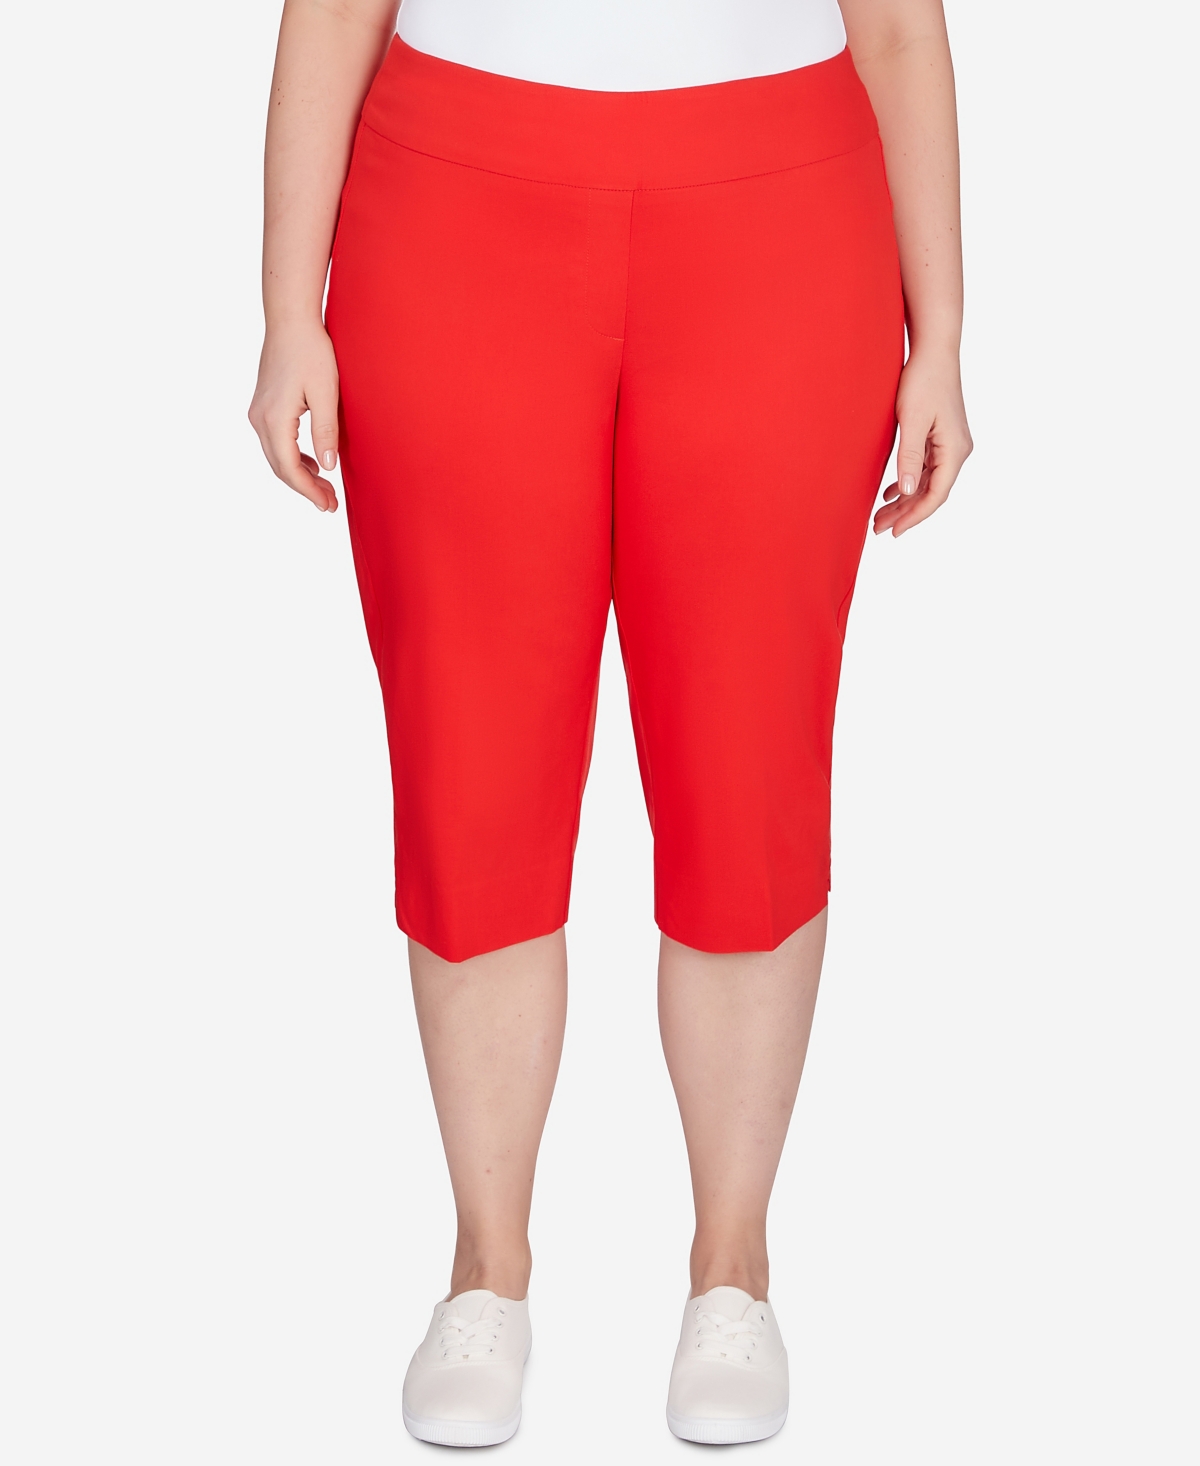 Ruby Rd. Plus Size Americana Clamdigger Capri Pants In Red